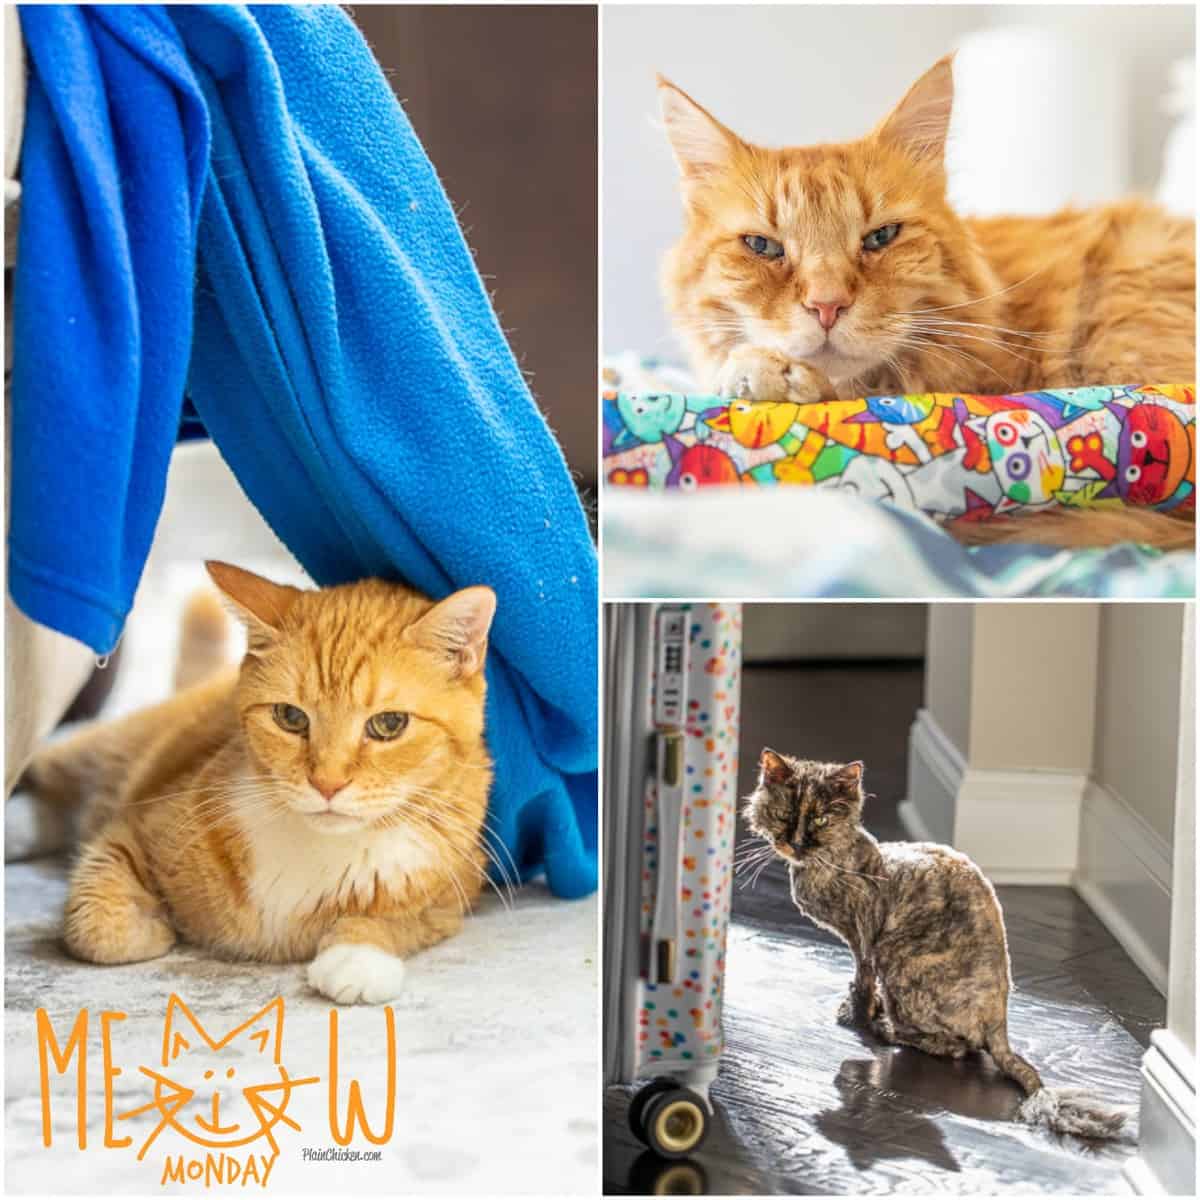 Meow Monday - pictures of cute cats to start your week! Come see what Jack, Squeaky, and Felix have been up to! #cats #cat